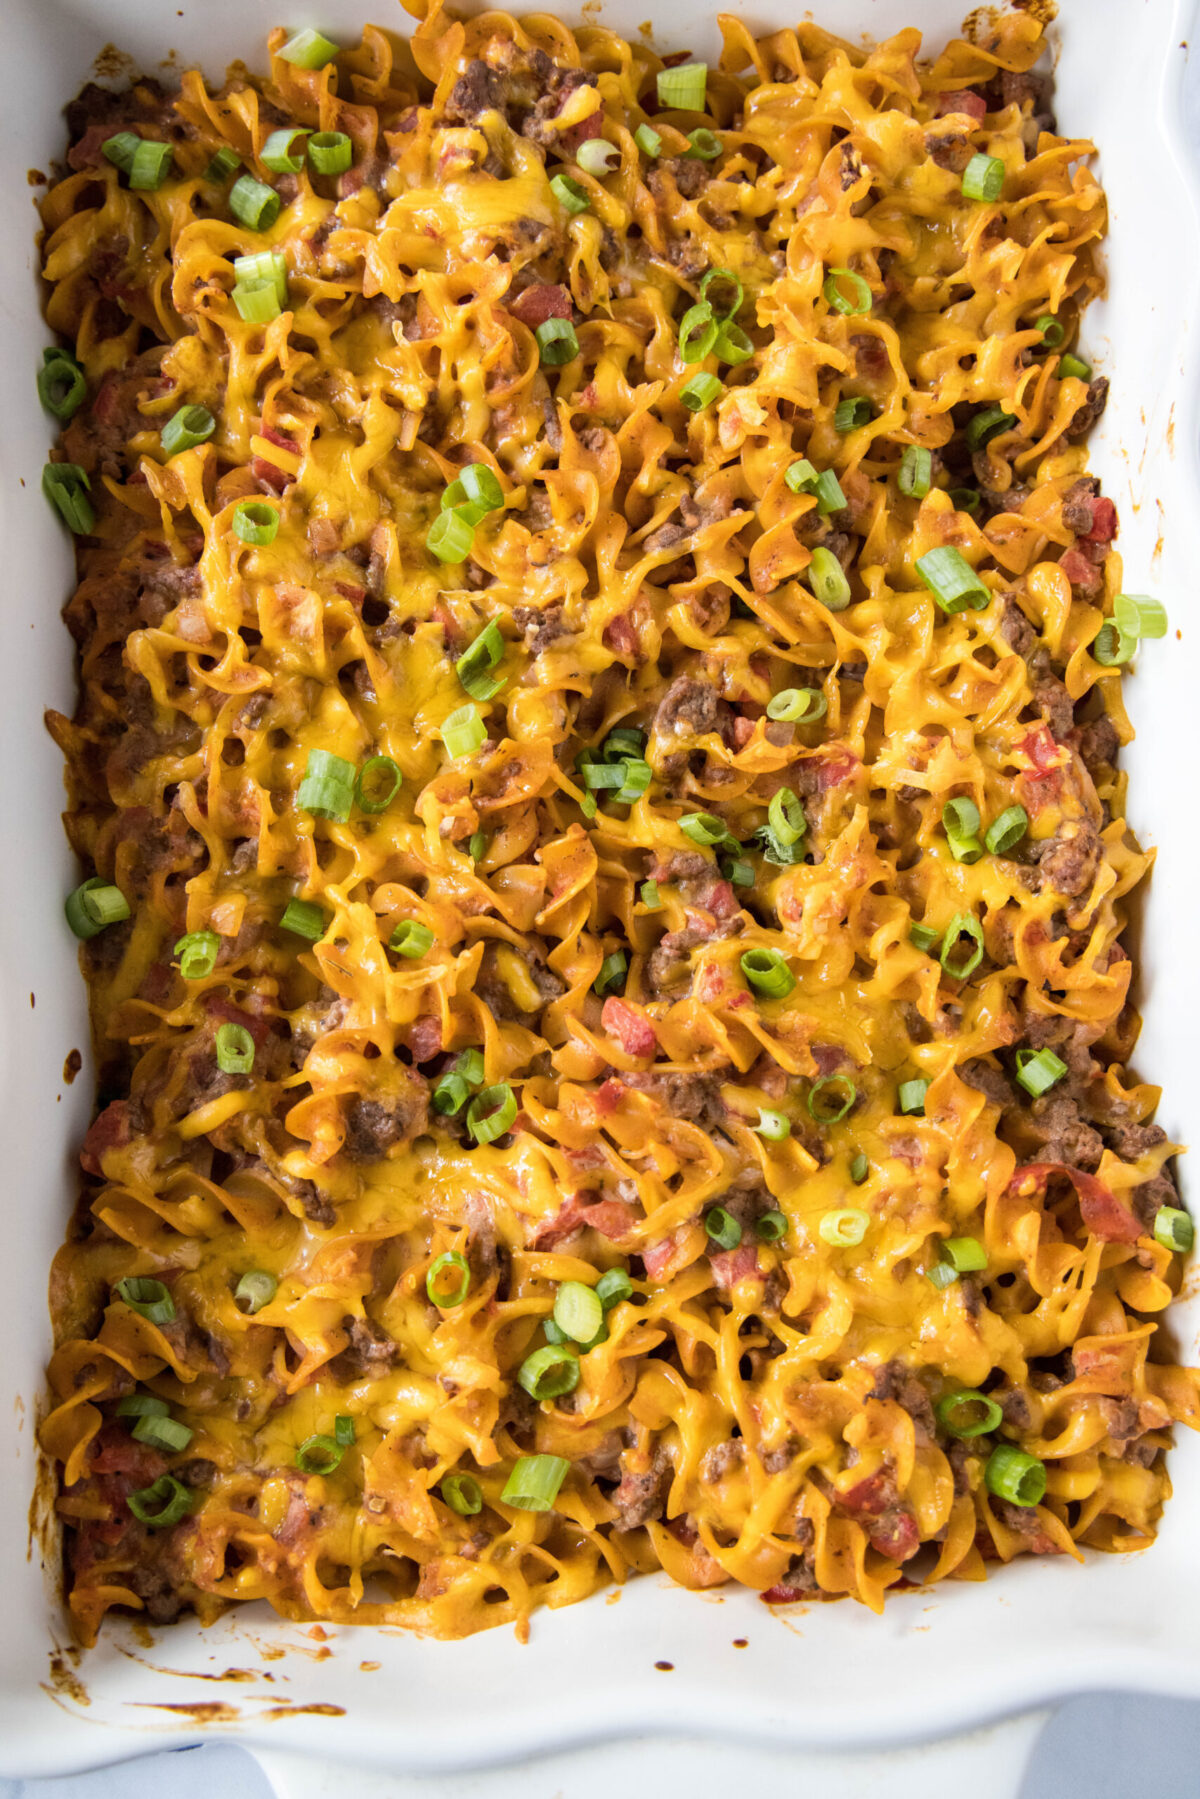 Overhead view of a casserole dish full of beef noodle casserole